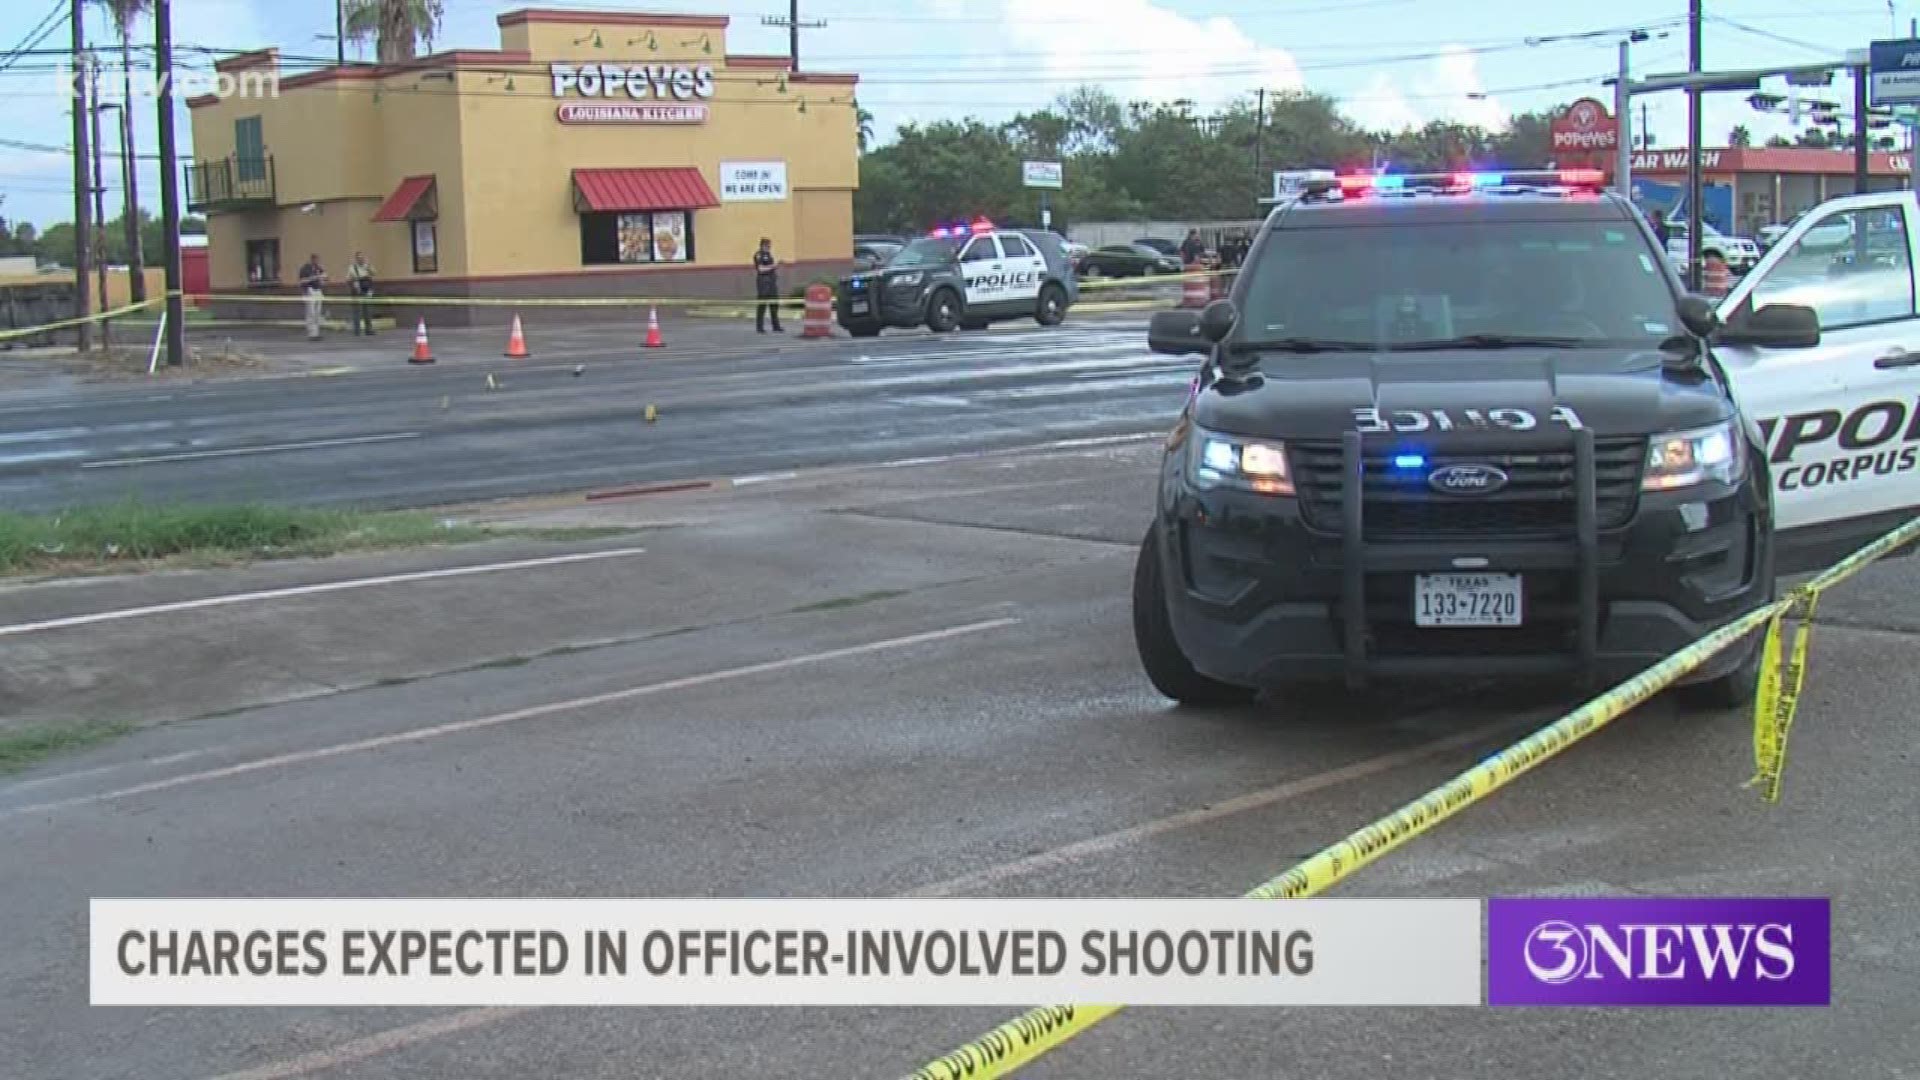 The 22-year-old man who was shot by a Corpus Christi Police Department officer Tuesday morning after confronting him with a pipe will be charged with felony aggravated assault of a peace officer, according to the CCPD Lt. Mike Pena.